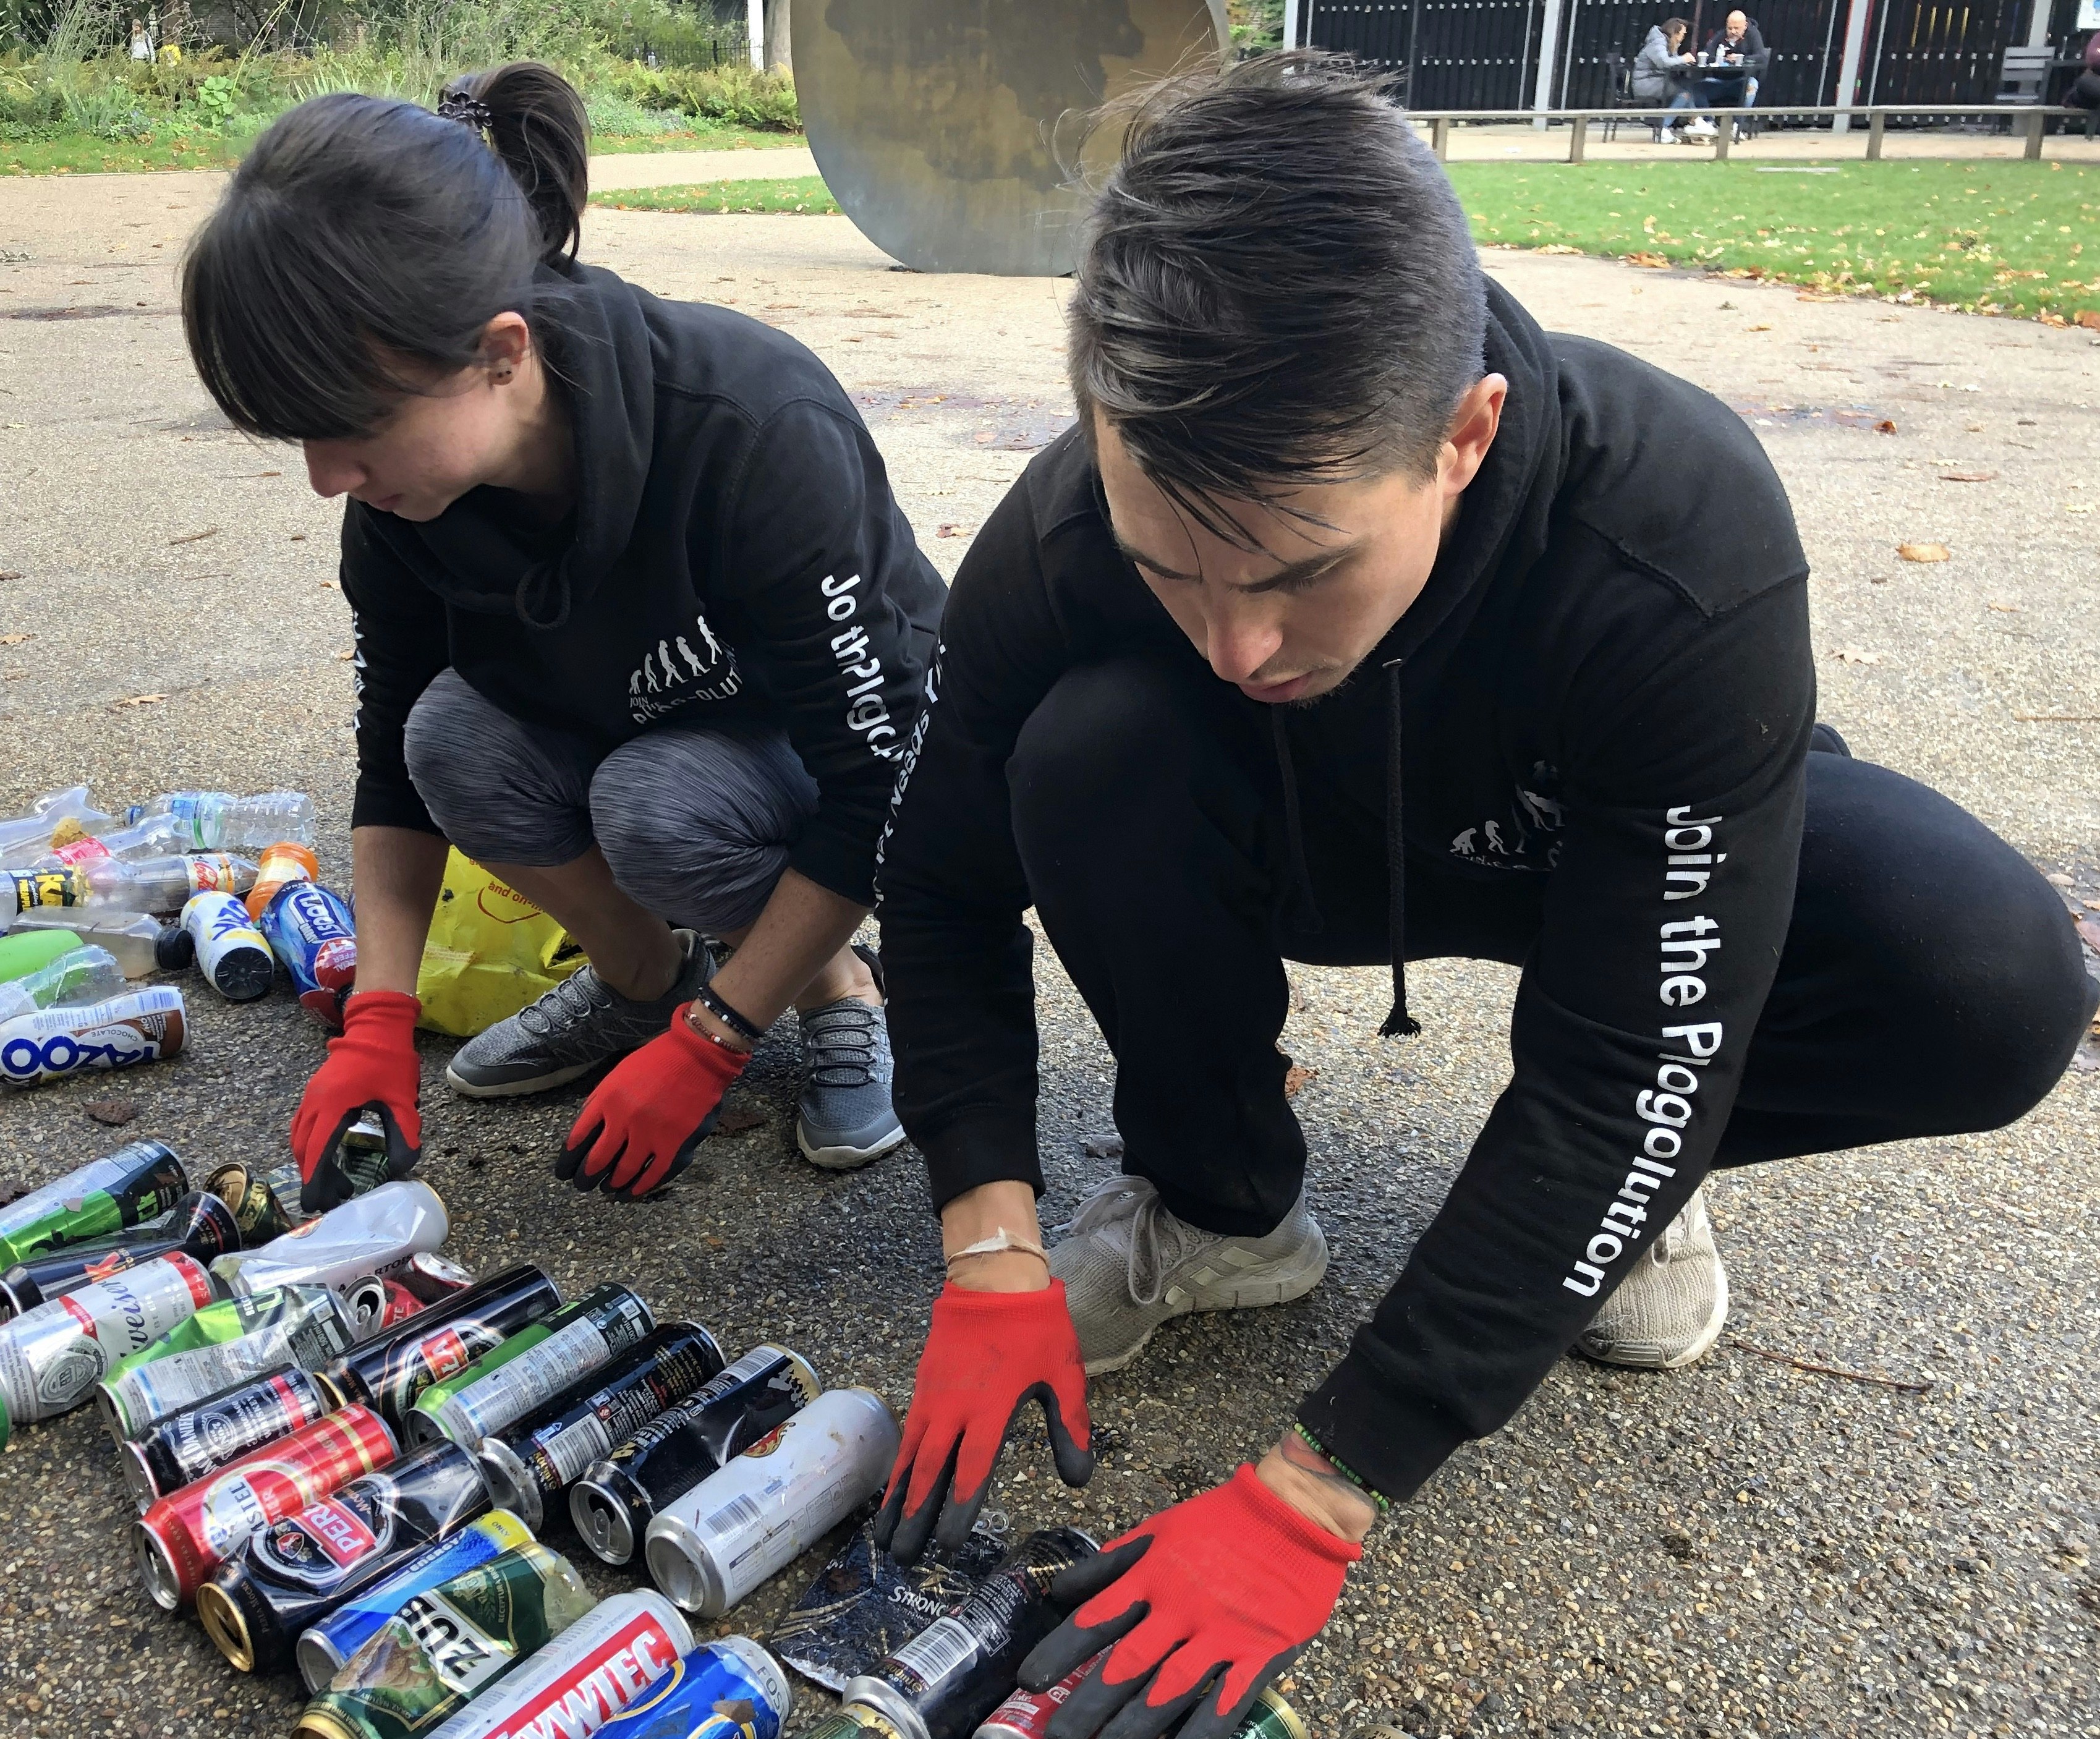 Dermot Kavanagh and Phoebe Abrahams sort through discarded cans of beer, while crouching on the ground. Both are dressed in all-black jogging gear emblazoned with the slogan 'join the plogolution'.